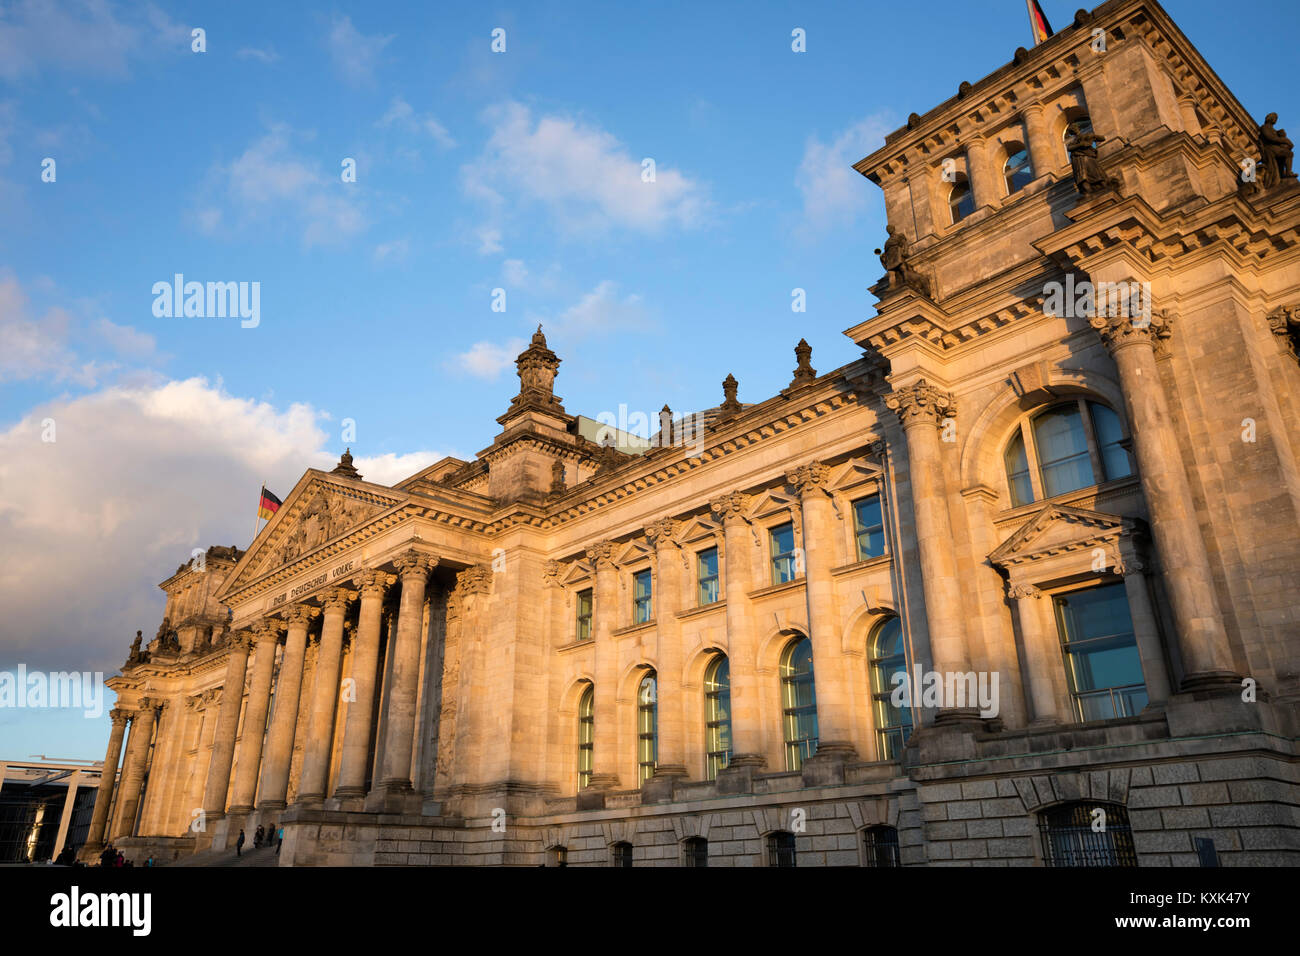 The Reichstag building, Berlin, Germany, Europe Stock Photo